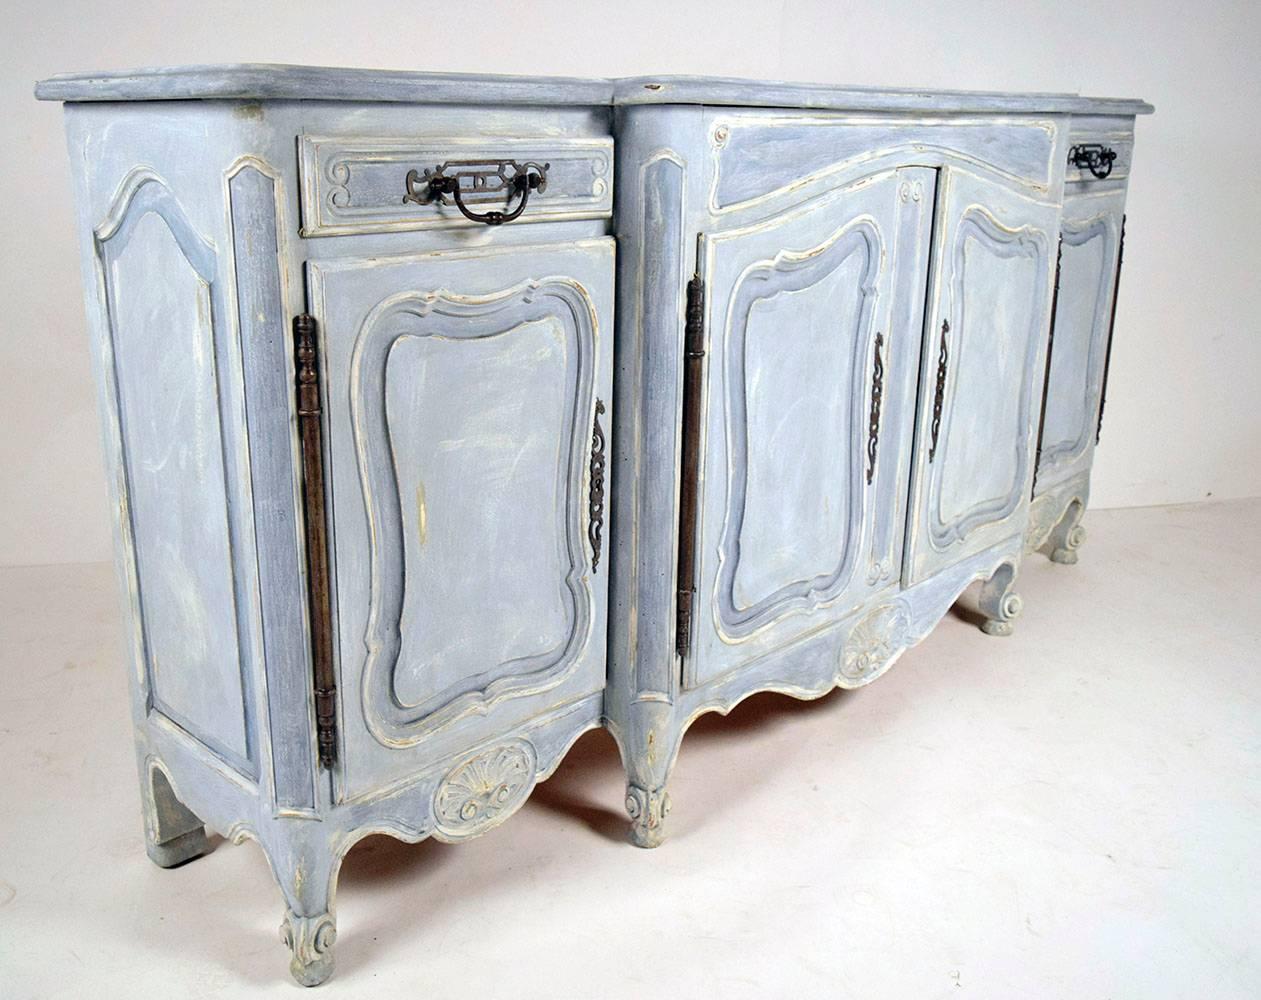 This is a one of a kind 1900's Louis XV sideboard or credenza. The buffet is made of solid oak wood that has recently been painted in a blue and off-white color combination, with a beautiful distressed finish. There is a beveled wooden top with two